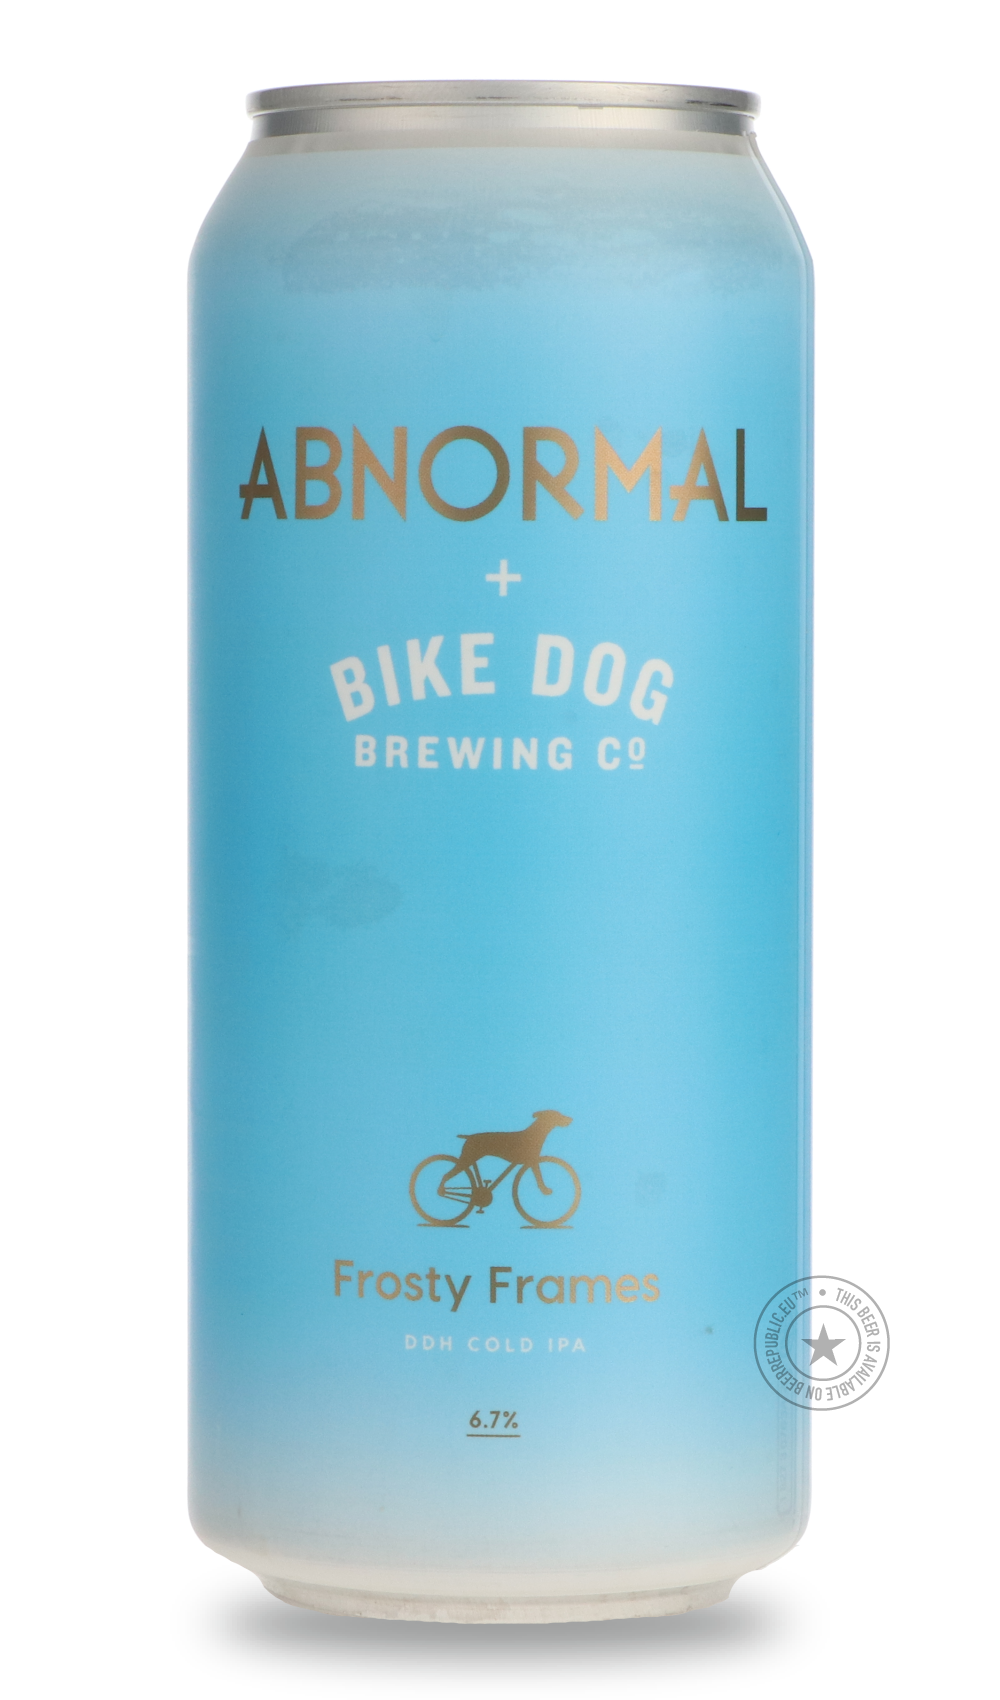 -Abnormal- Frosty Frames / Bike Dog-IPA- Only @ Beer Republic - The best online beer store for American & Canadian craft beer - Buy beer online from the USA and Canada - Bier online kopen - Amerikaans bier kopen - Craft beer store - Craft beer kopen - Amerikanisch bier kaufen - Bier online kaufen - Acheter biere online - IPA - Stout - Porter - New England IPA - Hazy IPA - Imperial Stout - Barrel Aged - Barrel Aged Imperial Stout - Brown - Dark beer - Blond - Blonde - Pilsner - Lager - Wheat - Weizen - Amber